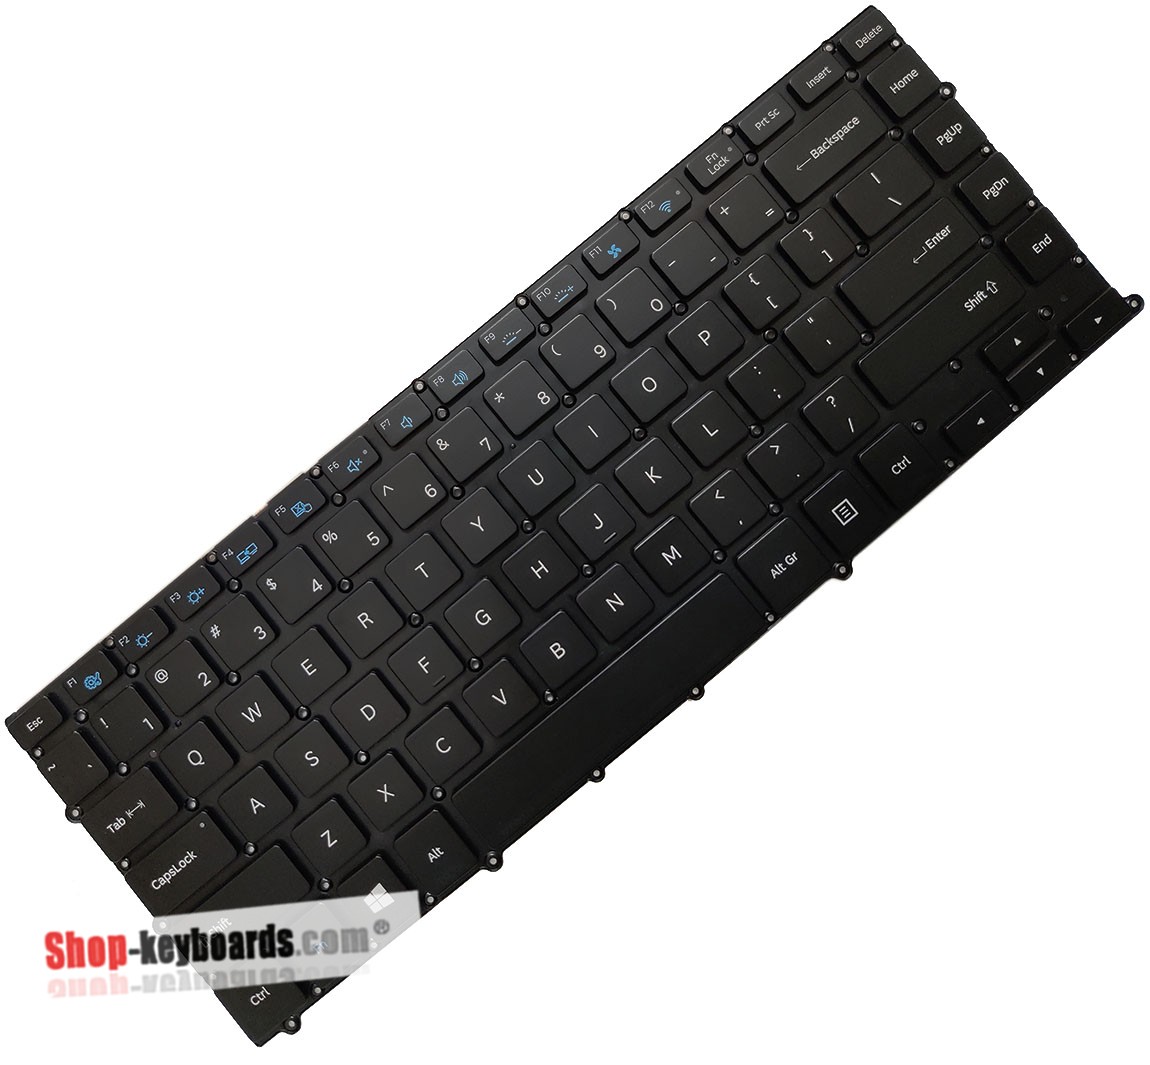 Samsung NP900X4C-A06US Keyboard replacement